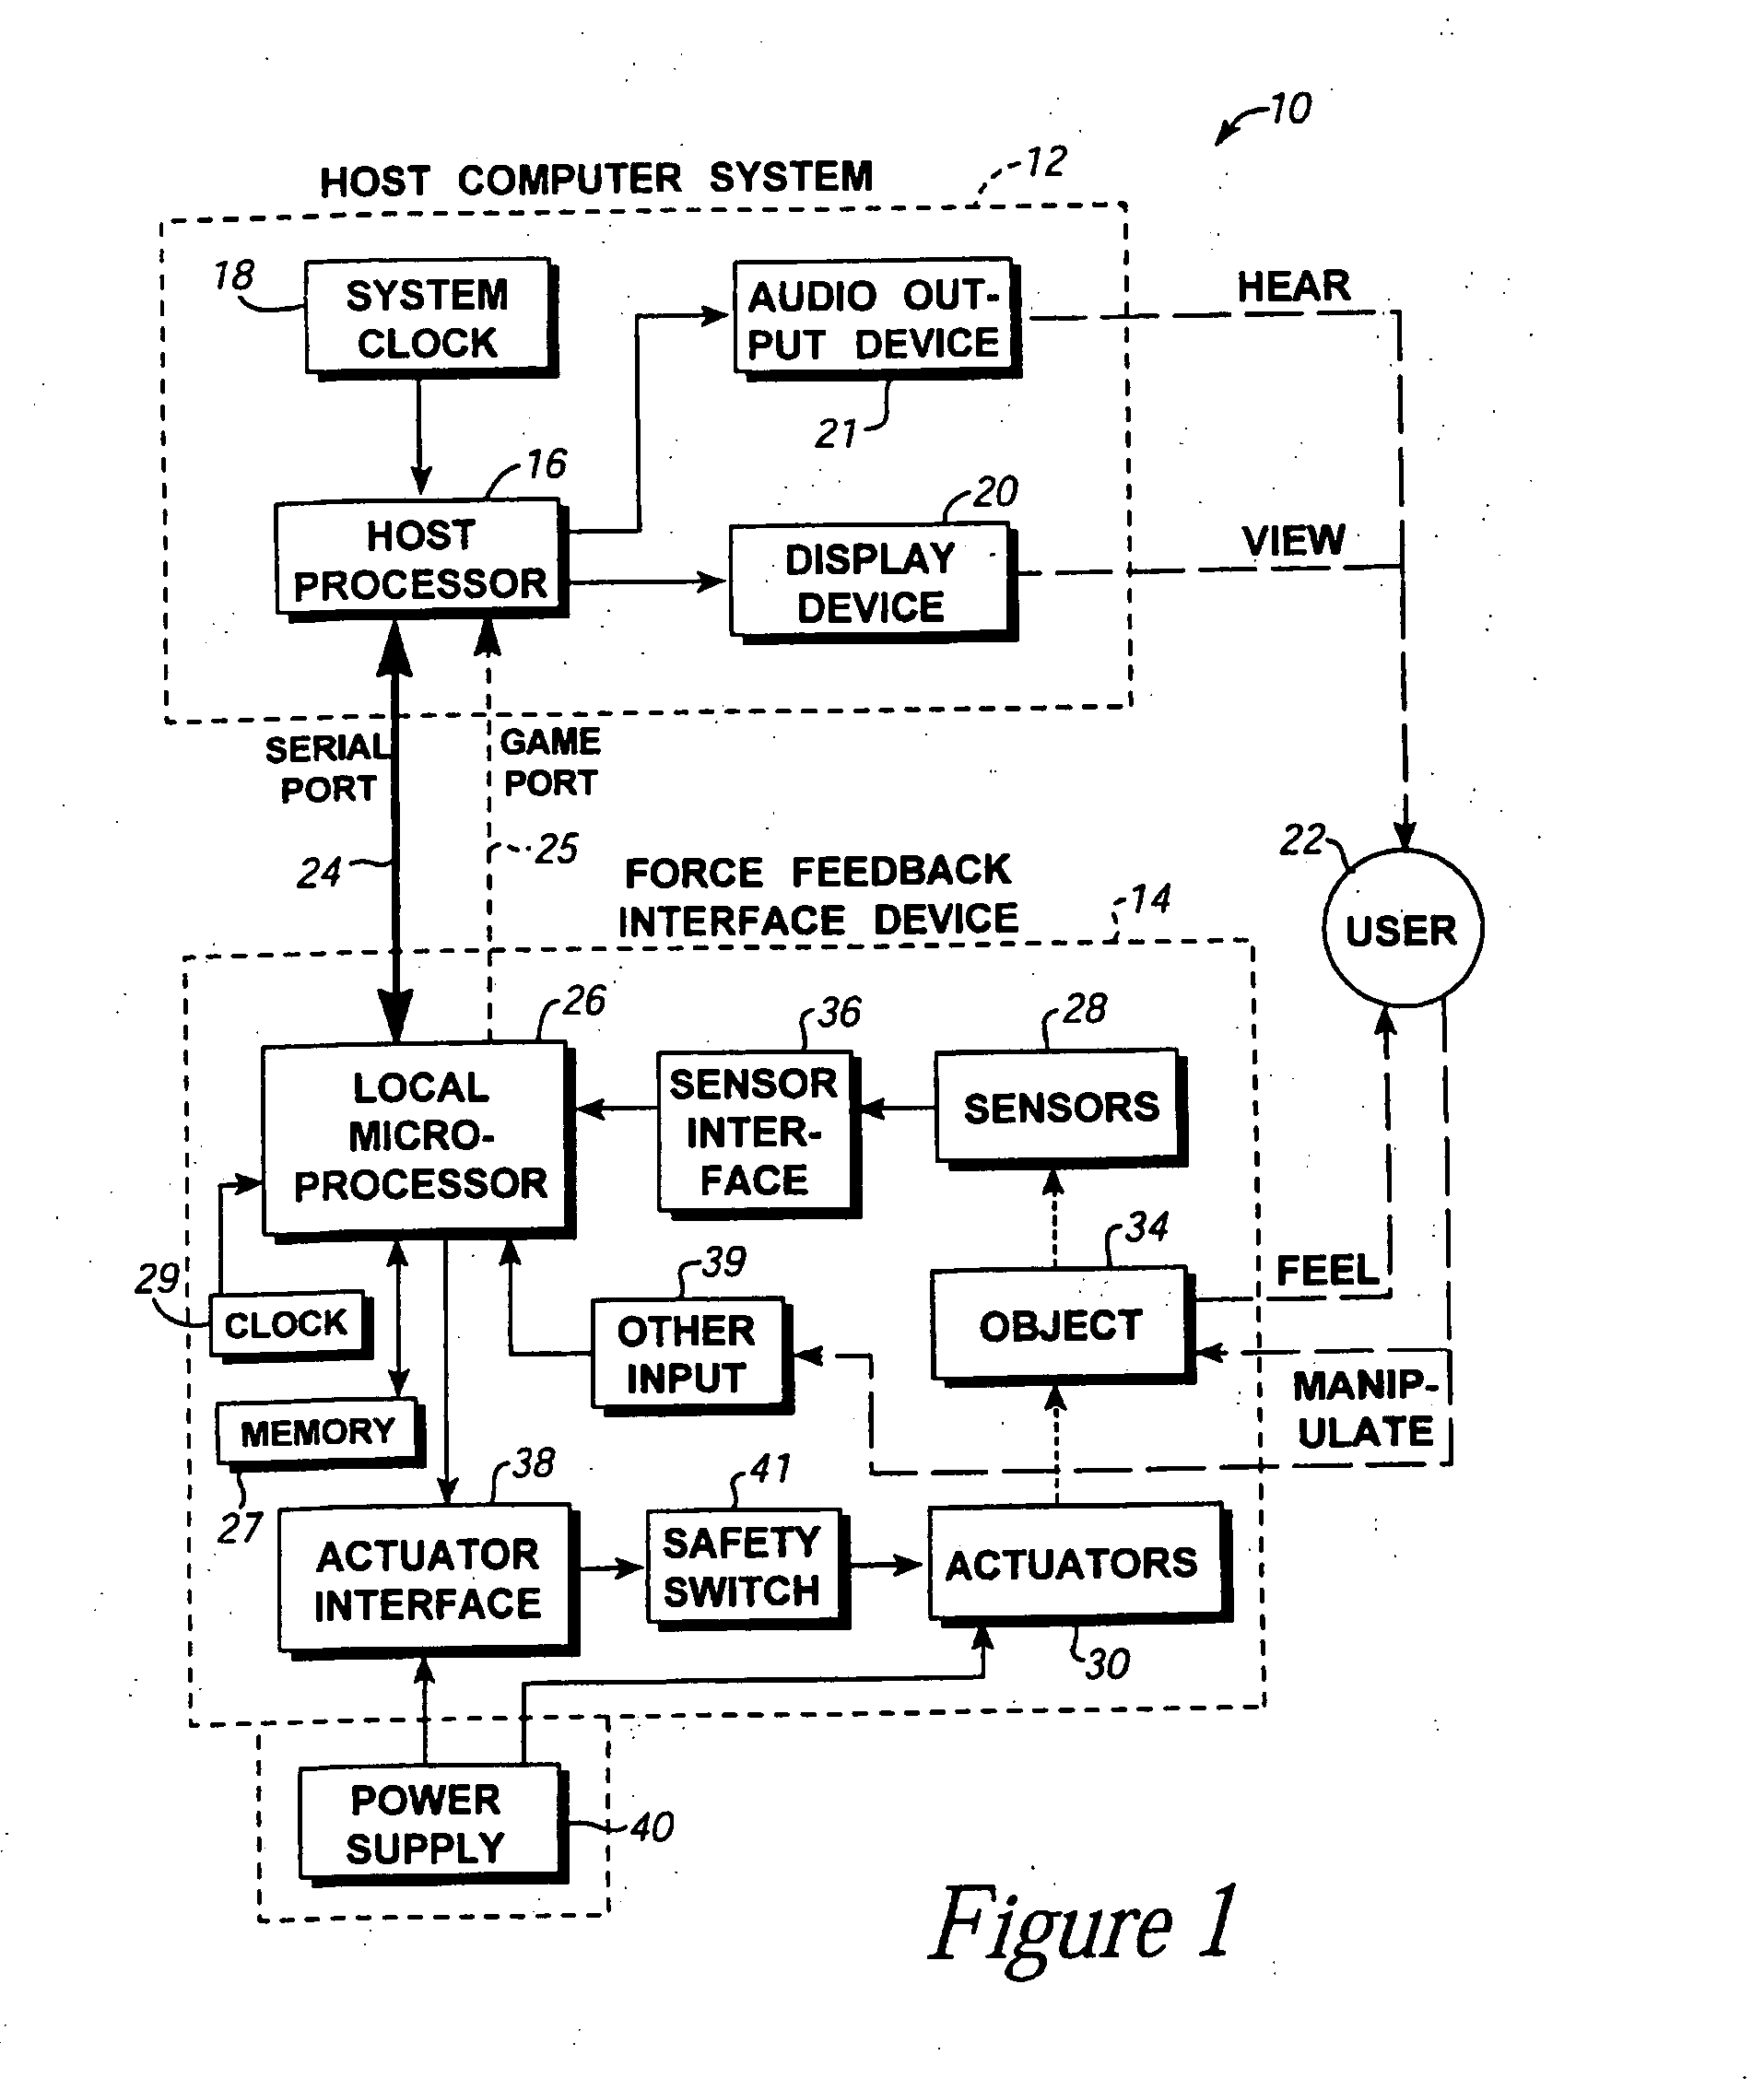 Providing force feedback to a user of an interface device based on interactions of a user-controlled cursor in a graphical user interface